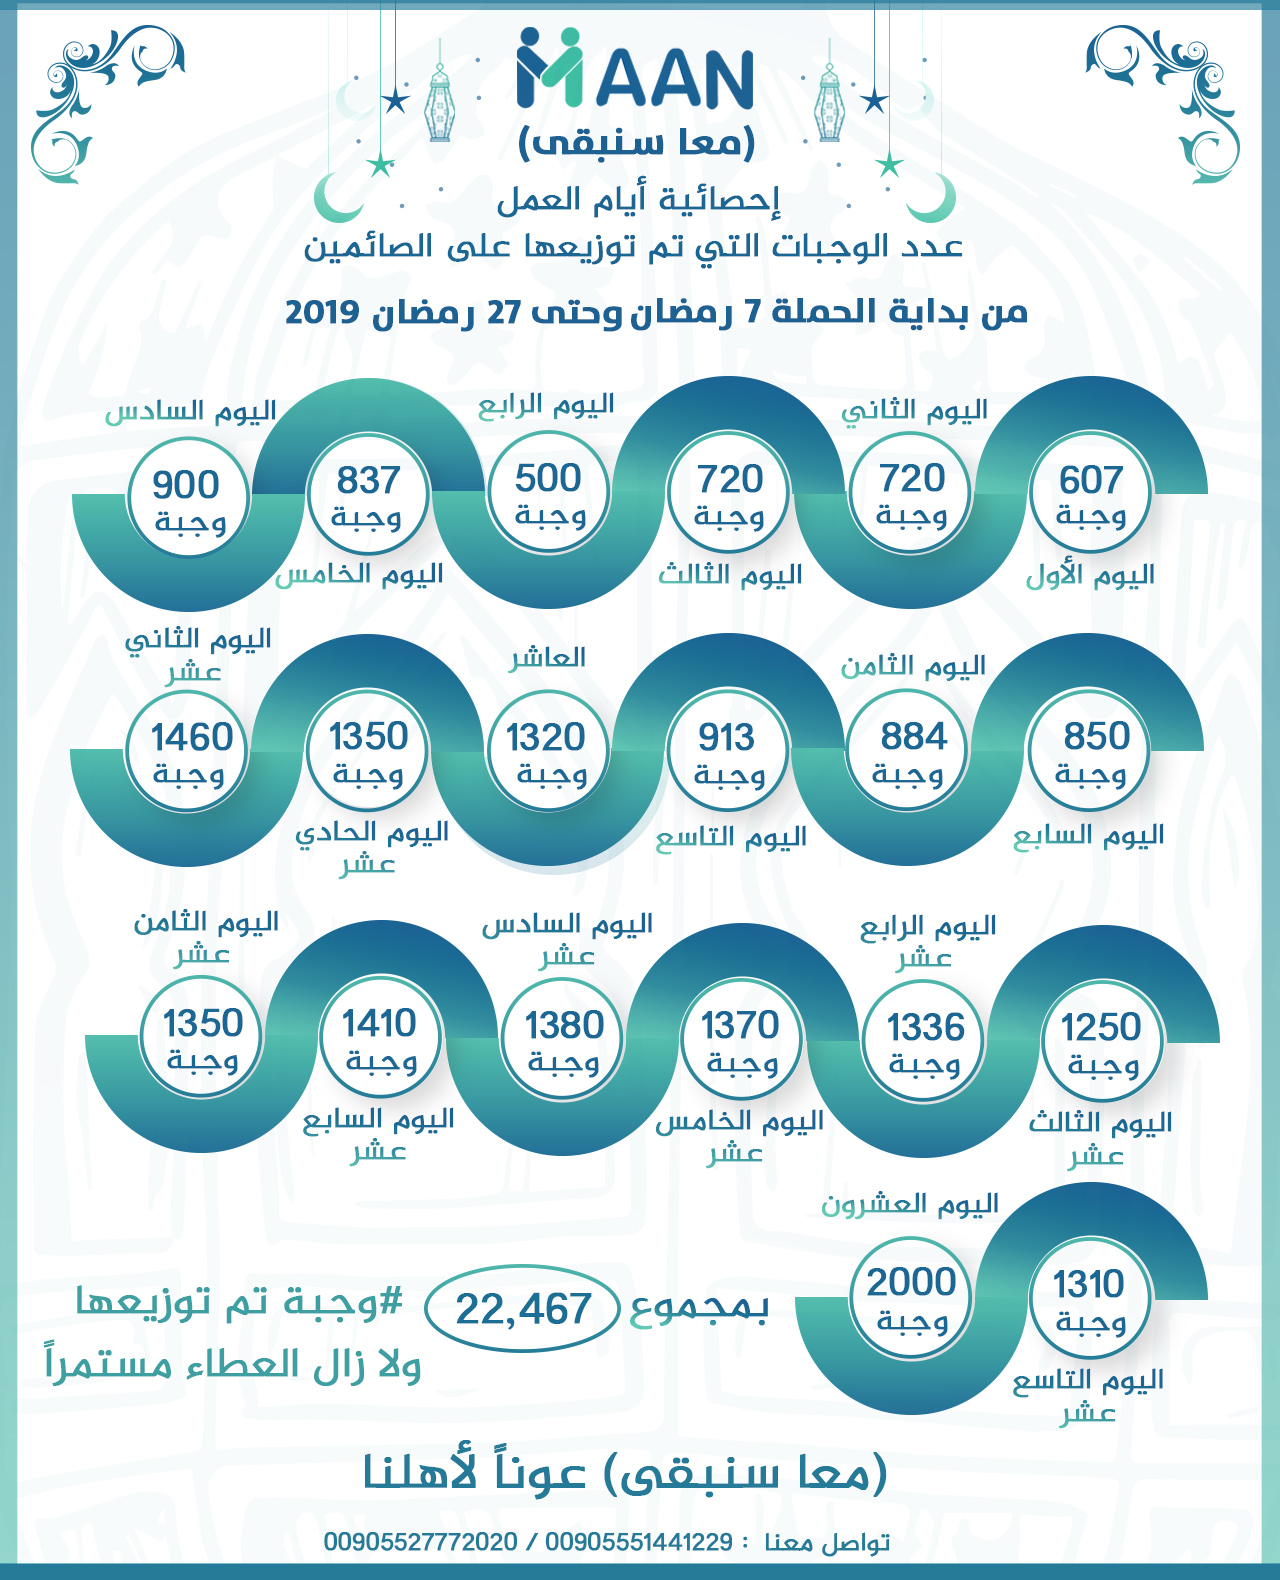 Statistics from the beginning of the campaign 7 Ramadan until the date of 27 Ramadan 2019